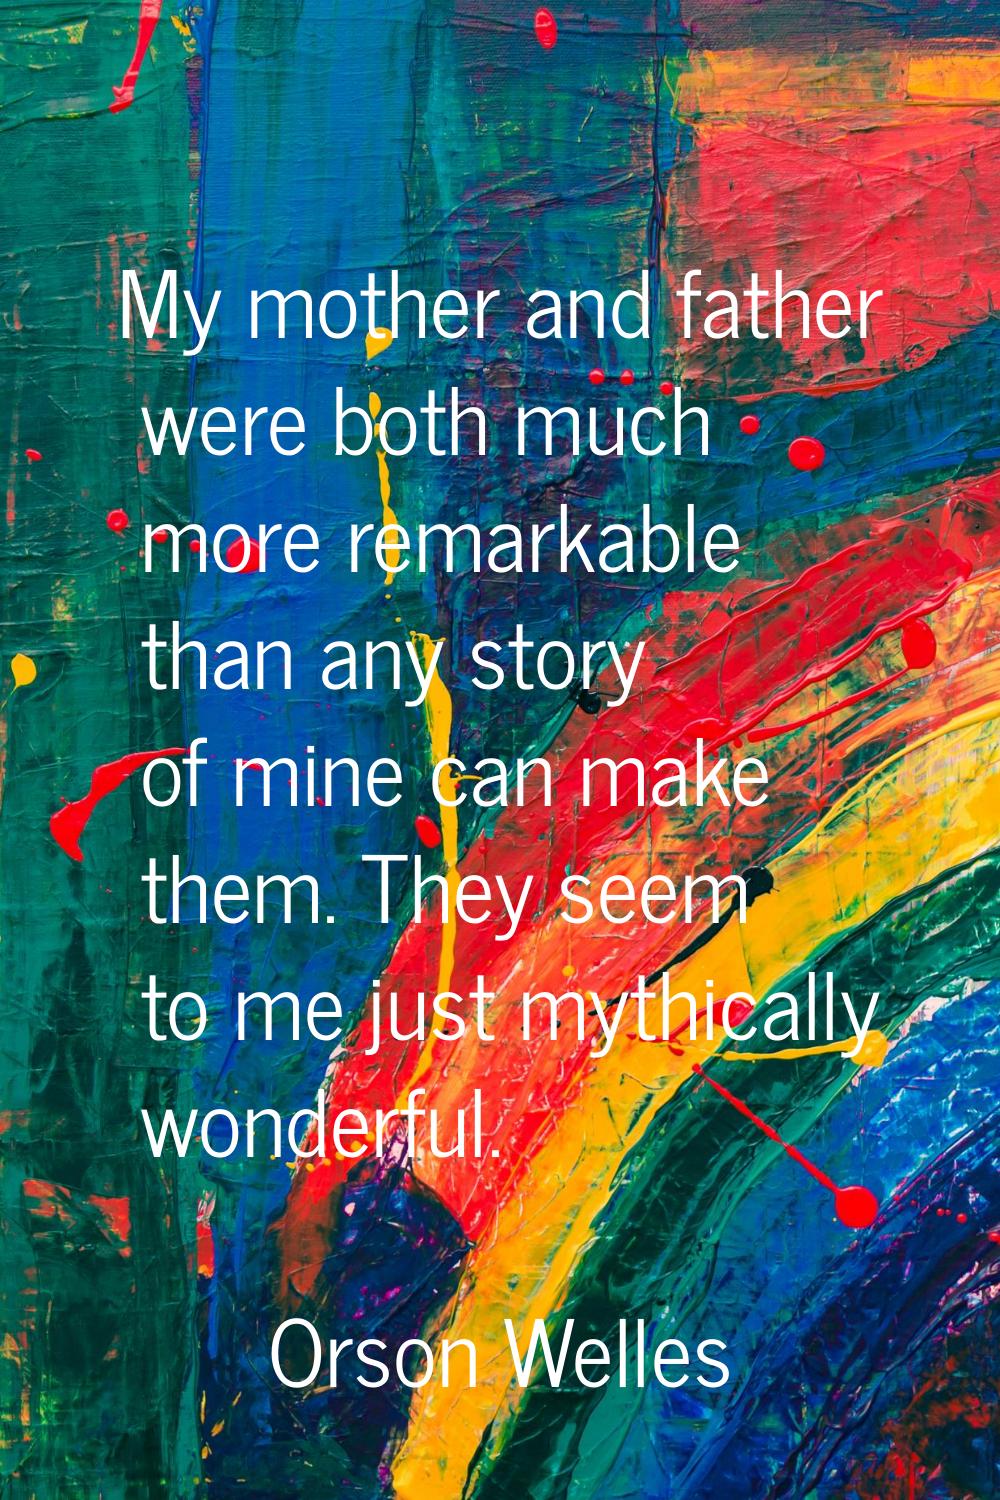 My mother and father were both much more remarkable than any story of mine can make them. They seem